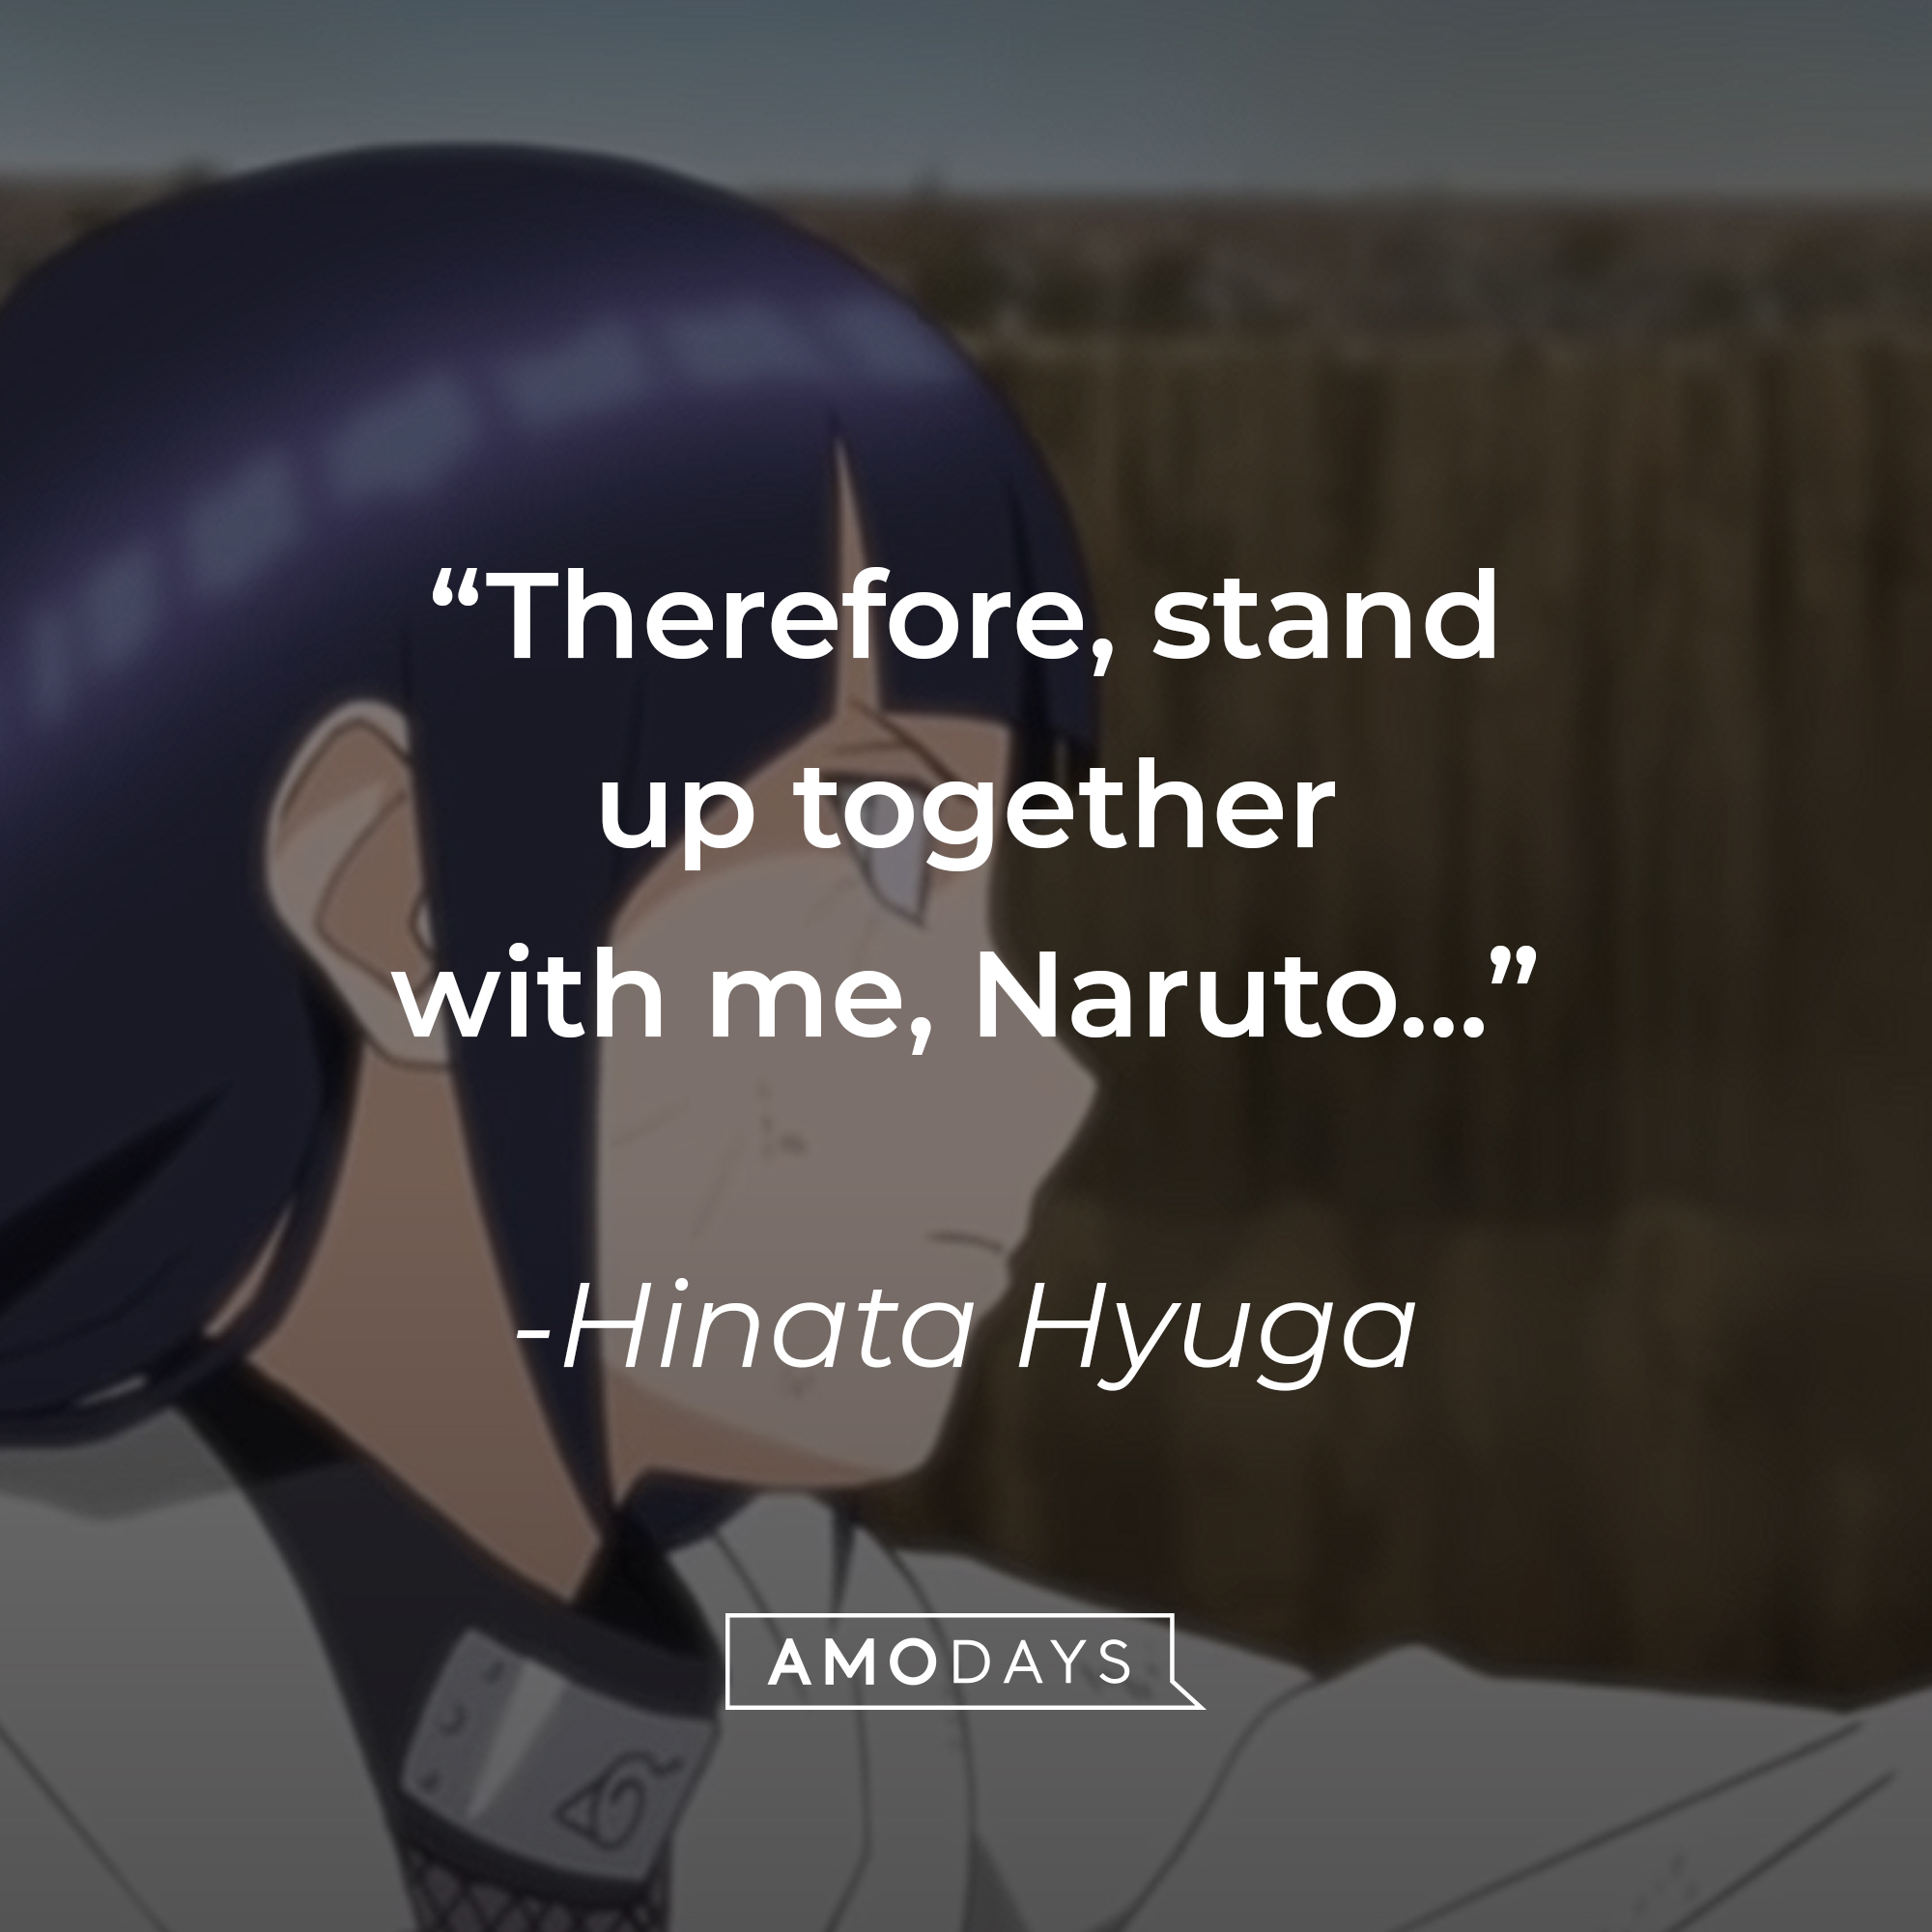 Hinata Hyuga with her quote: "Therefore, stand up together with me, Naruto…”  | Source: youtube.com/CrunchyrollCollection